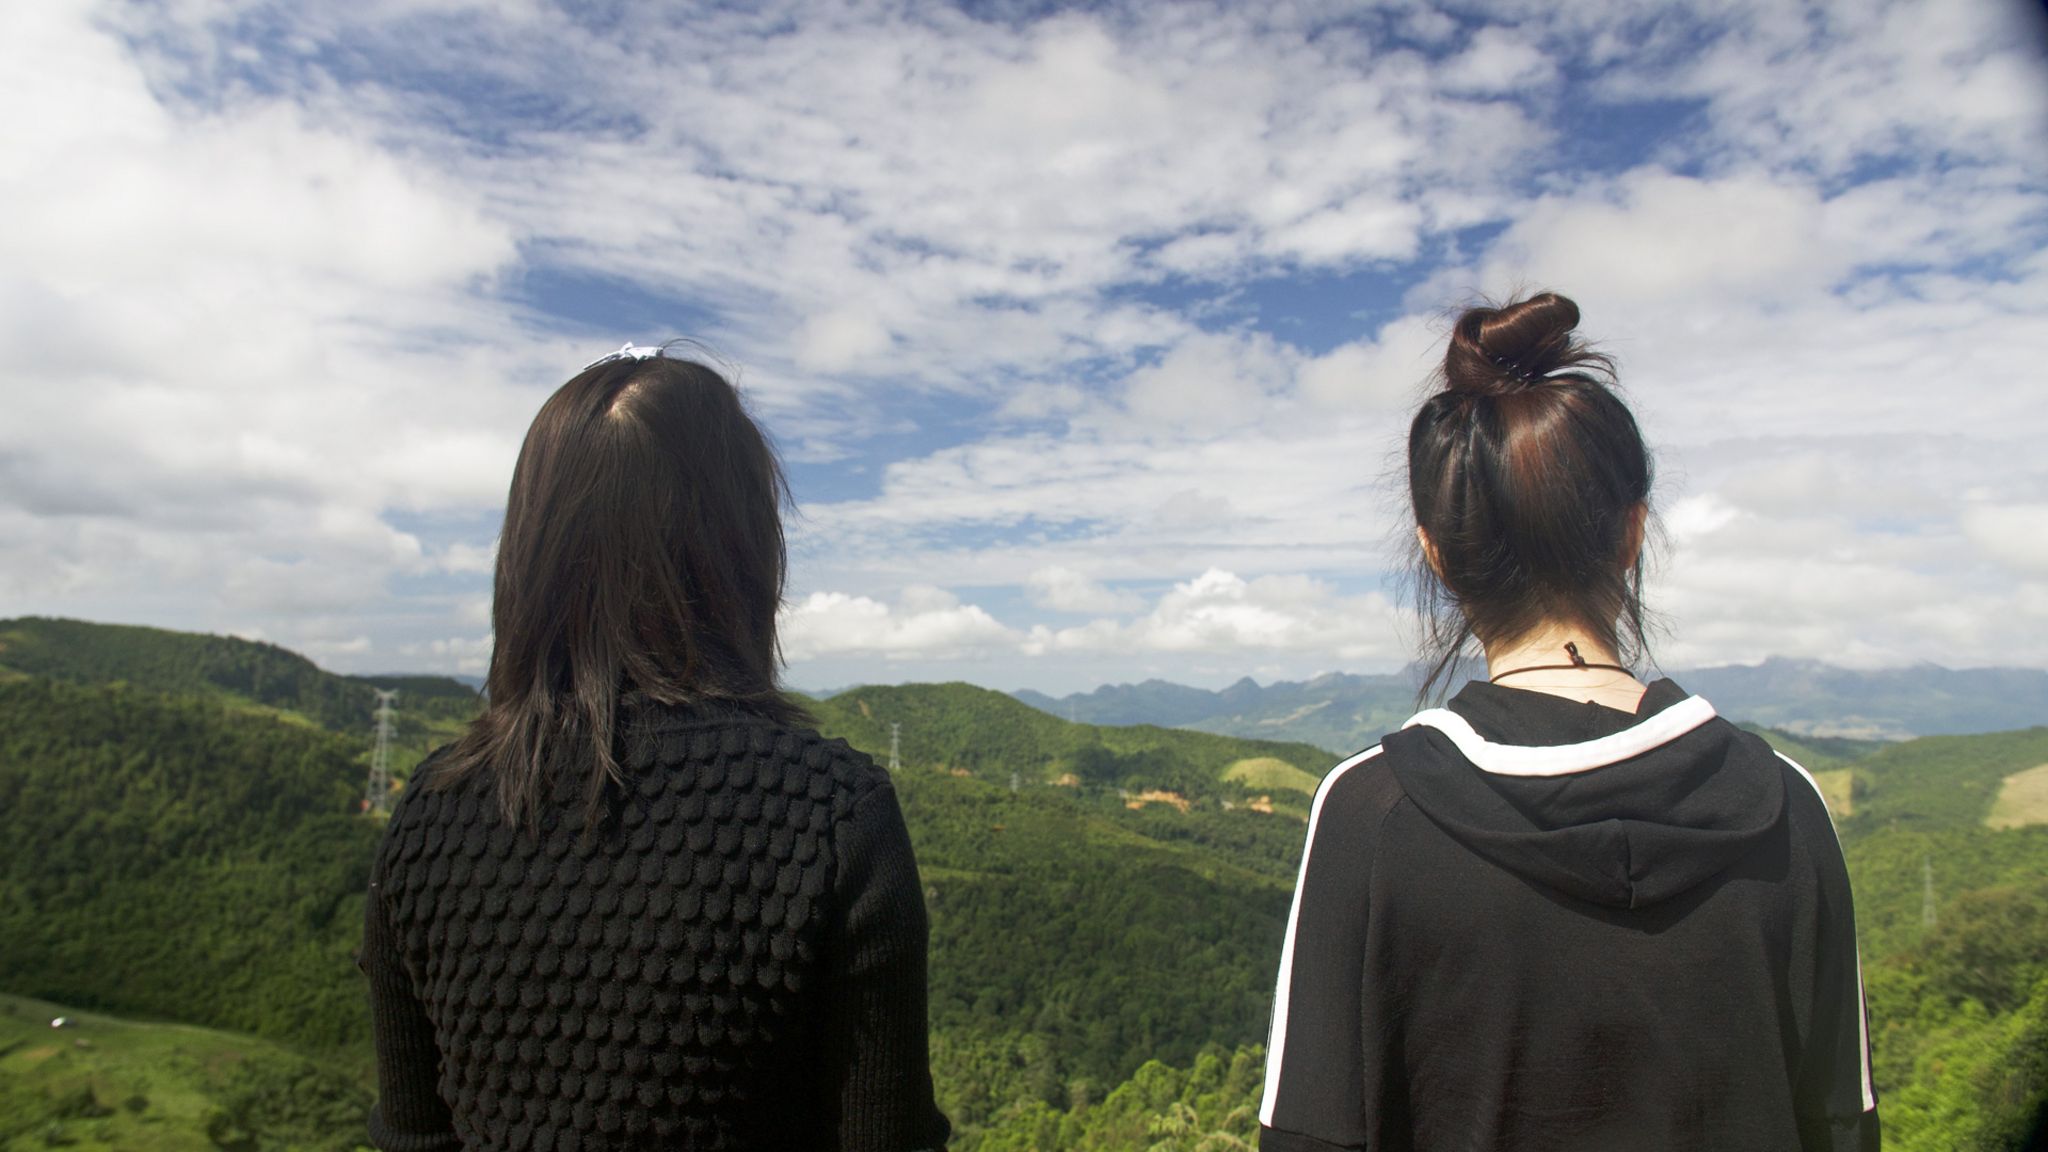 Now safely over the border Mira (L) and Jiyun (R) look out over a mountain range back towards China